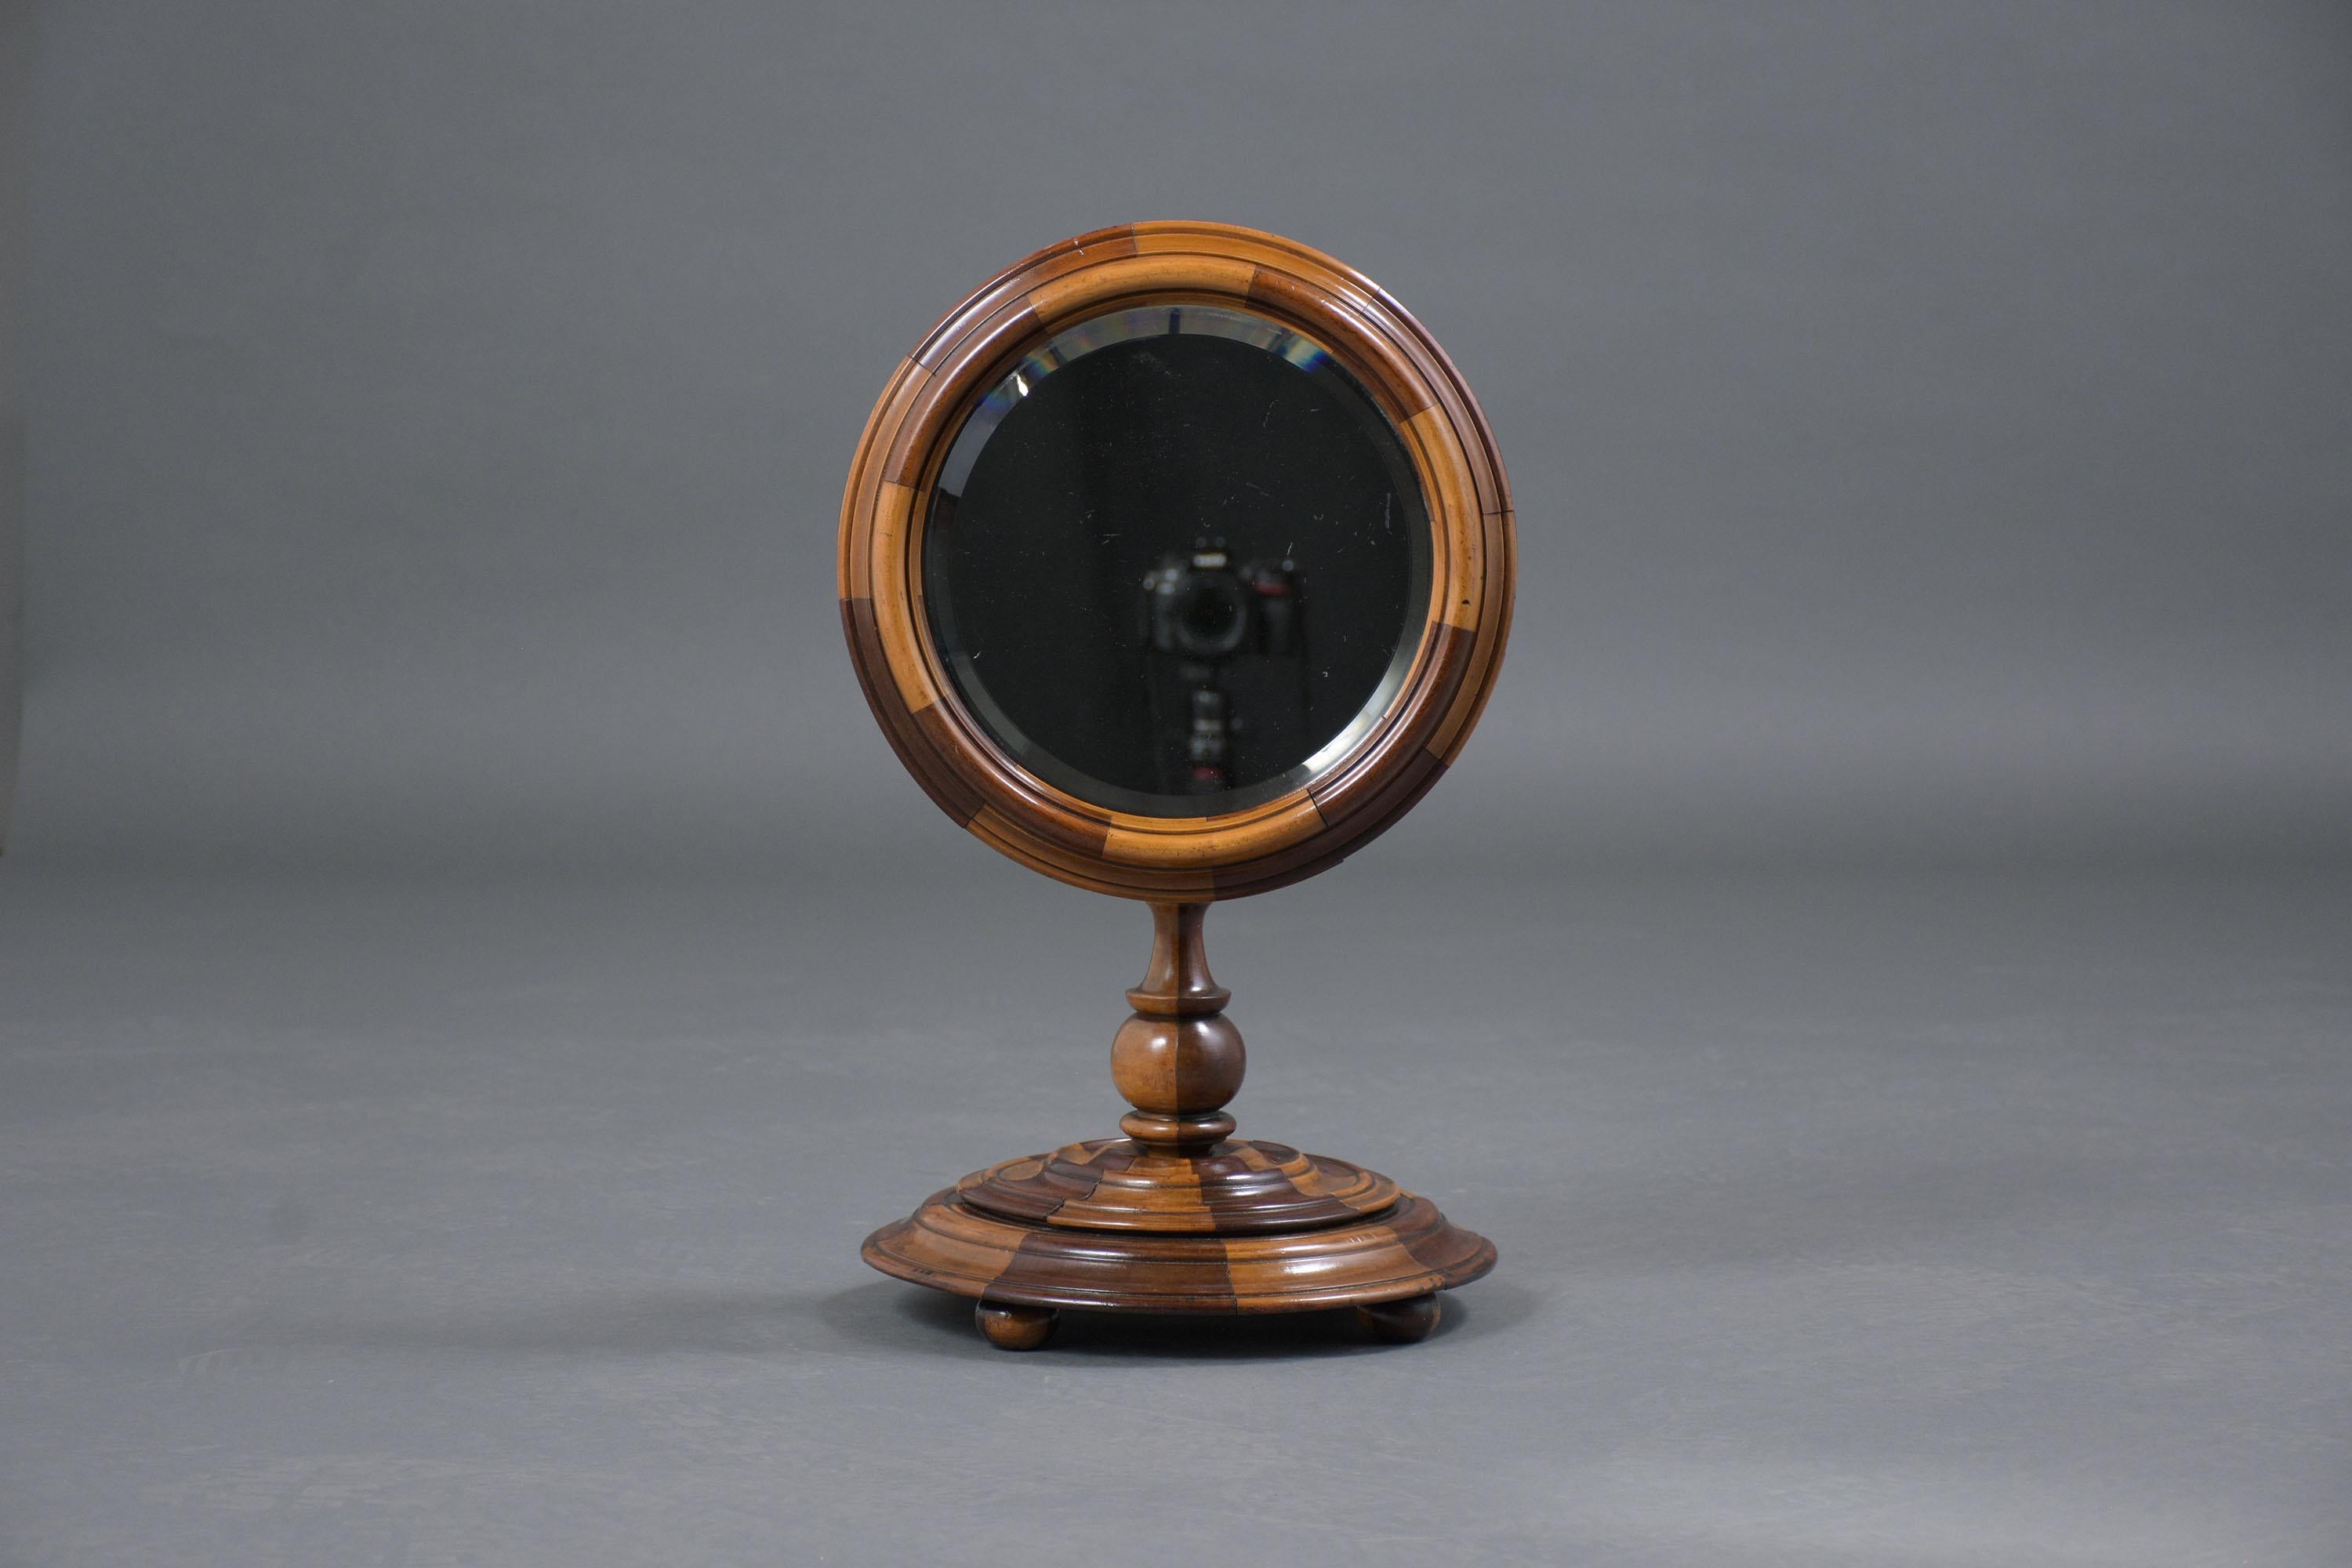 An extraordinary late 19th-century vanity mirror is beautifully crafted out of walnut wood this fabulous piece features a bevel circular swivel mirror fully reflective sunrise veneered design finished in walnut color just waxed and polished